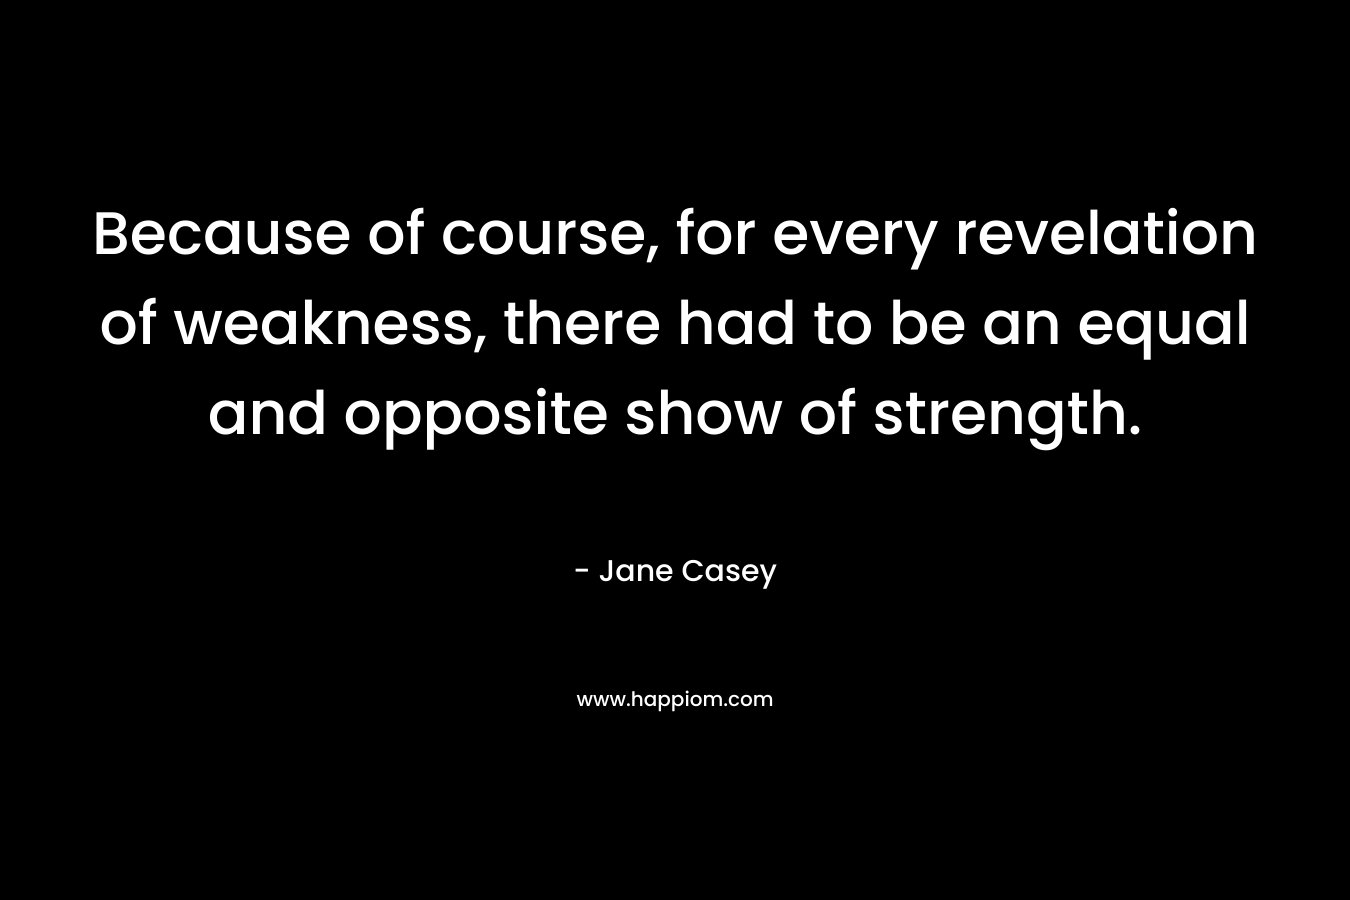 Because of course, for every revelation of weakness, there had to be an equal and opposite show of strength. – Jane Casey